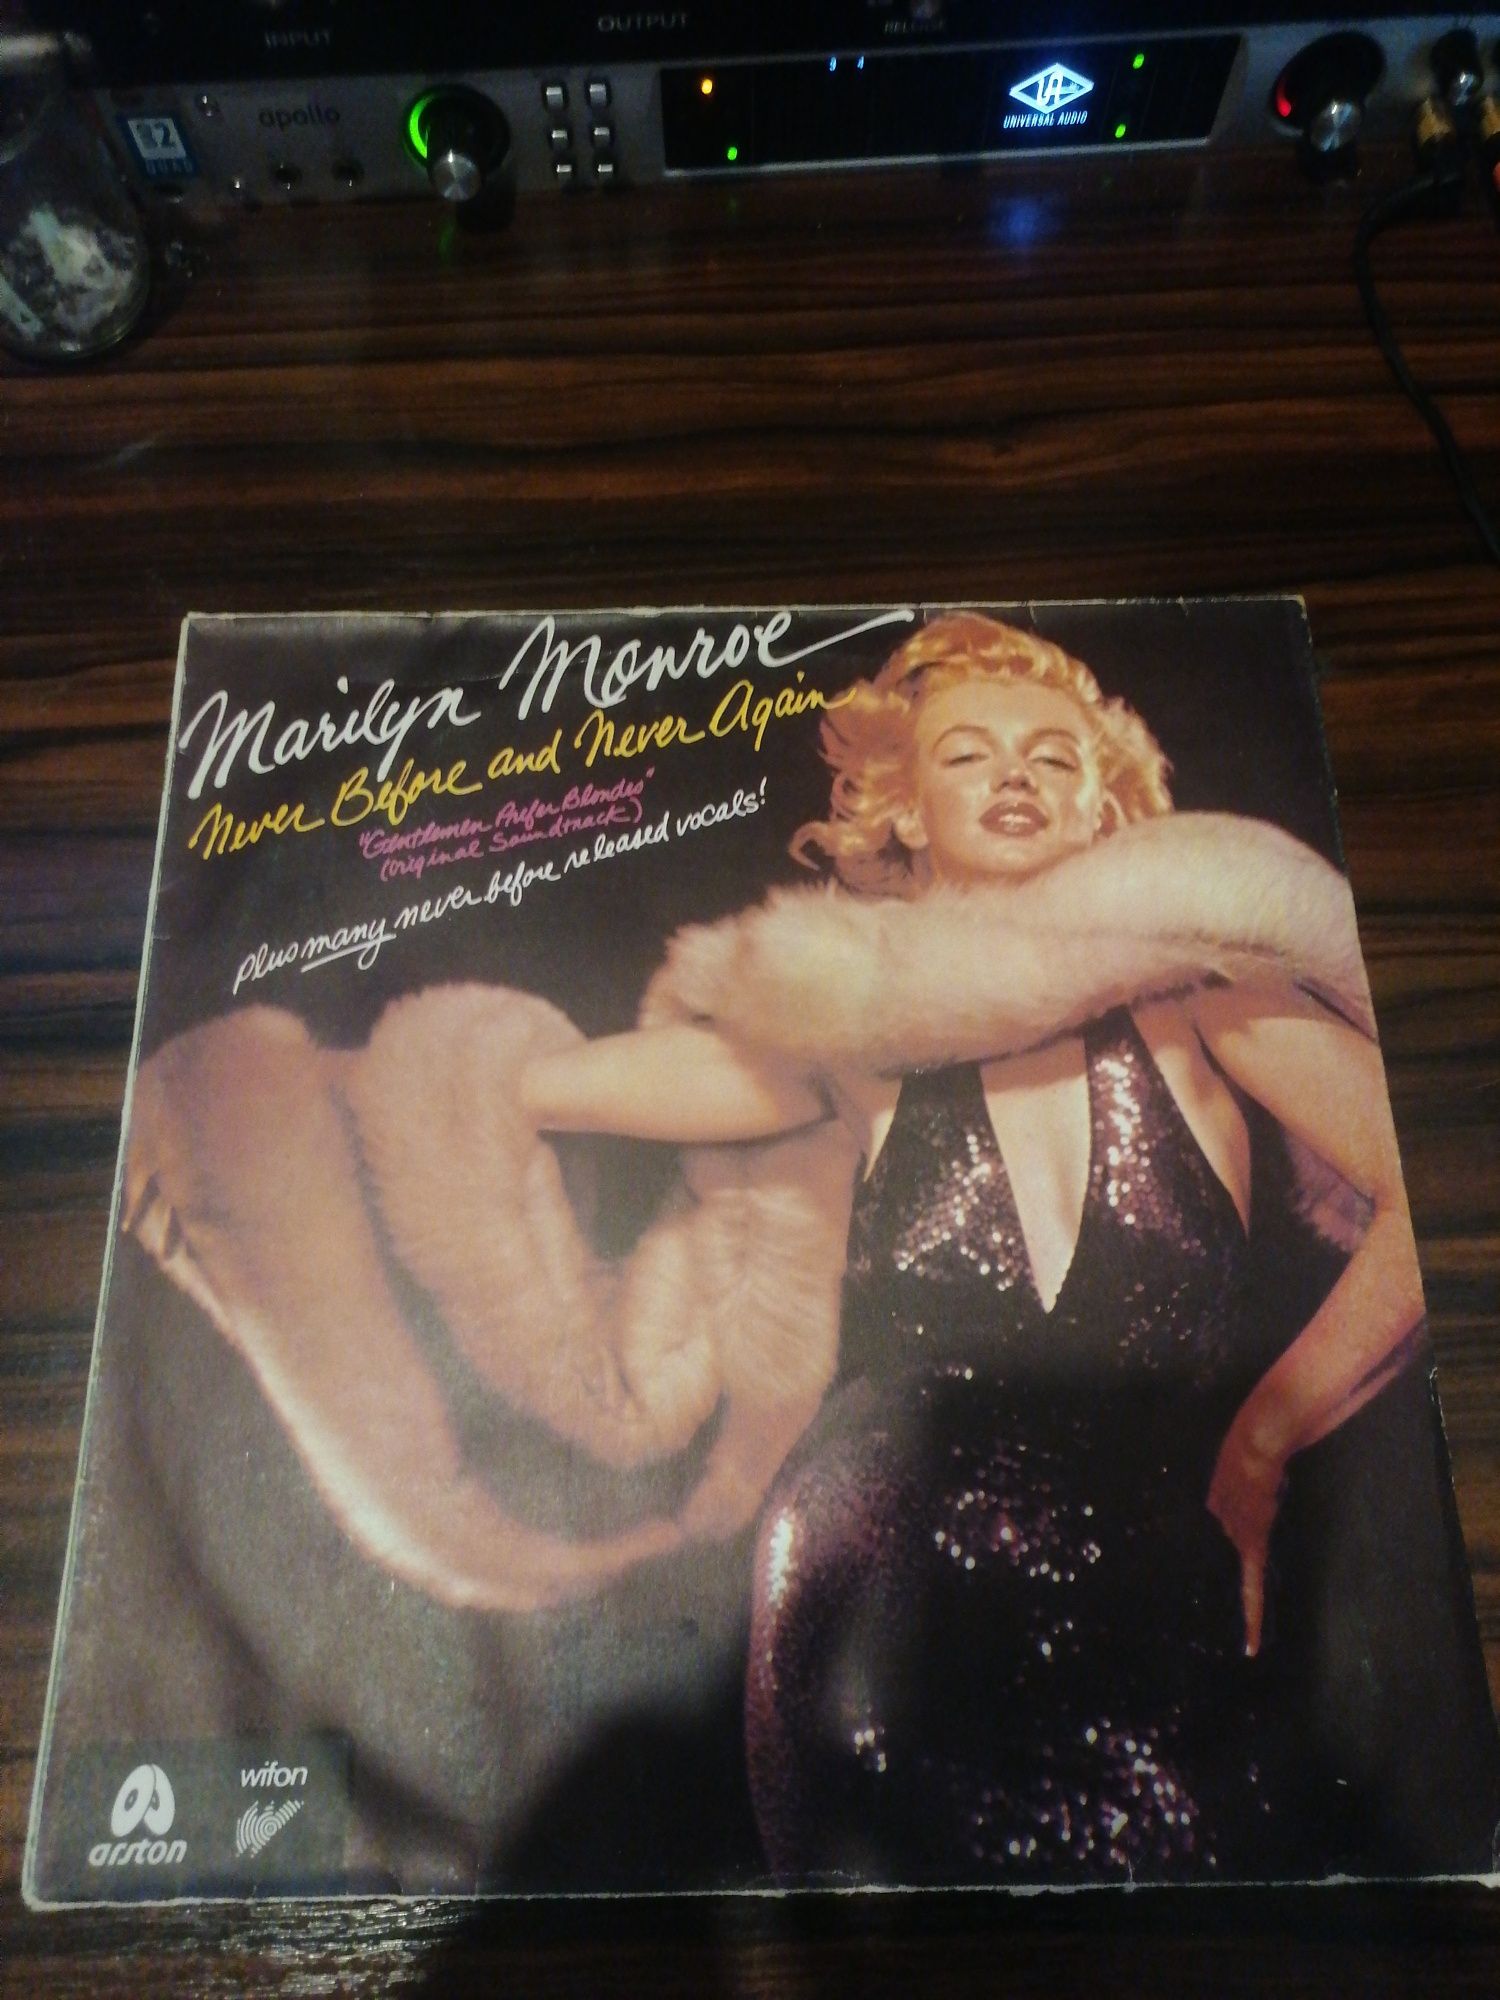 Marilyn monroe and Jane russel never before winyl.m32 EX+